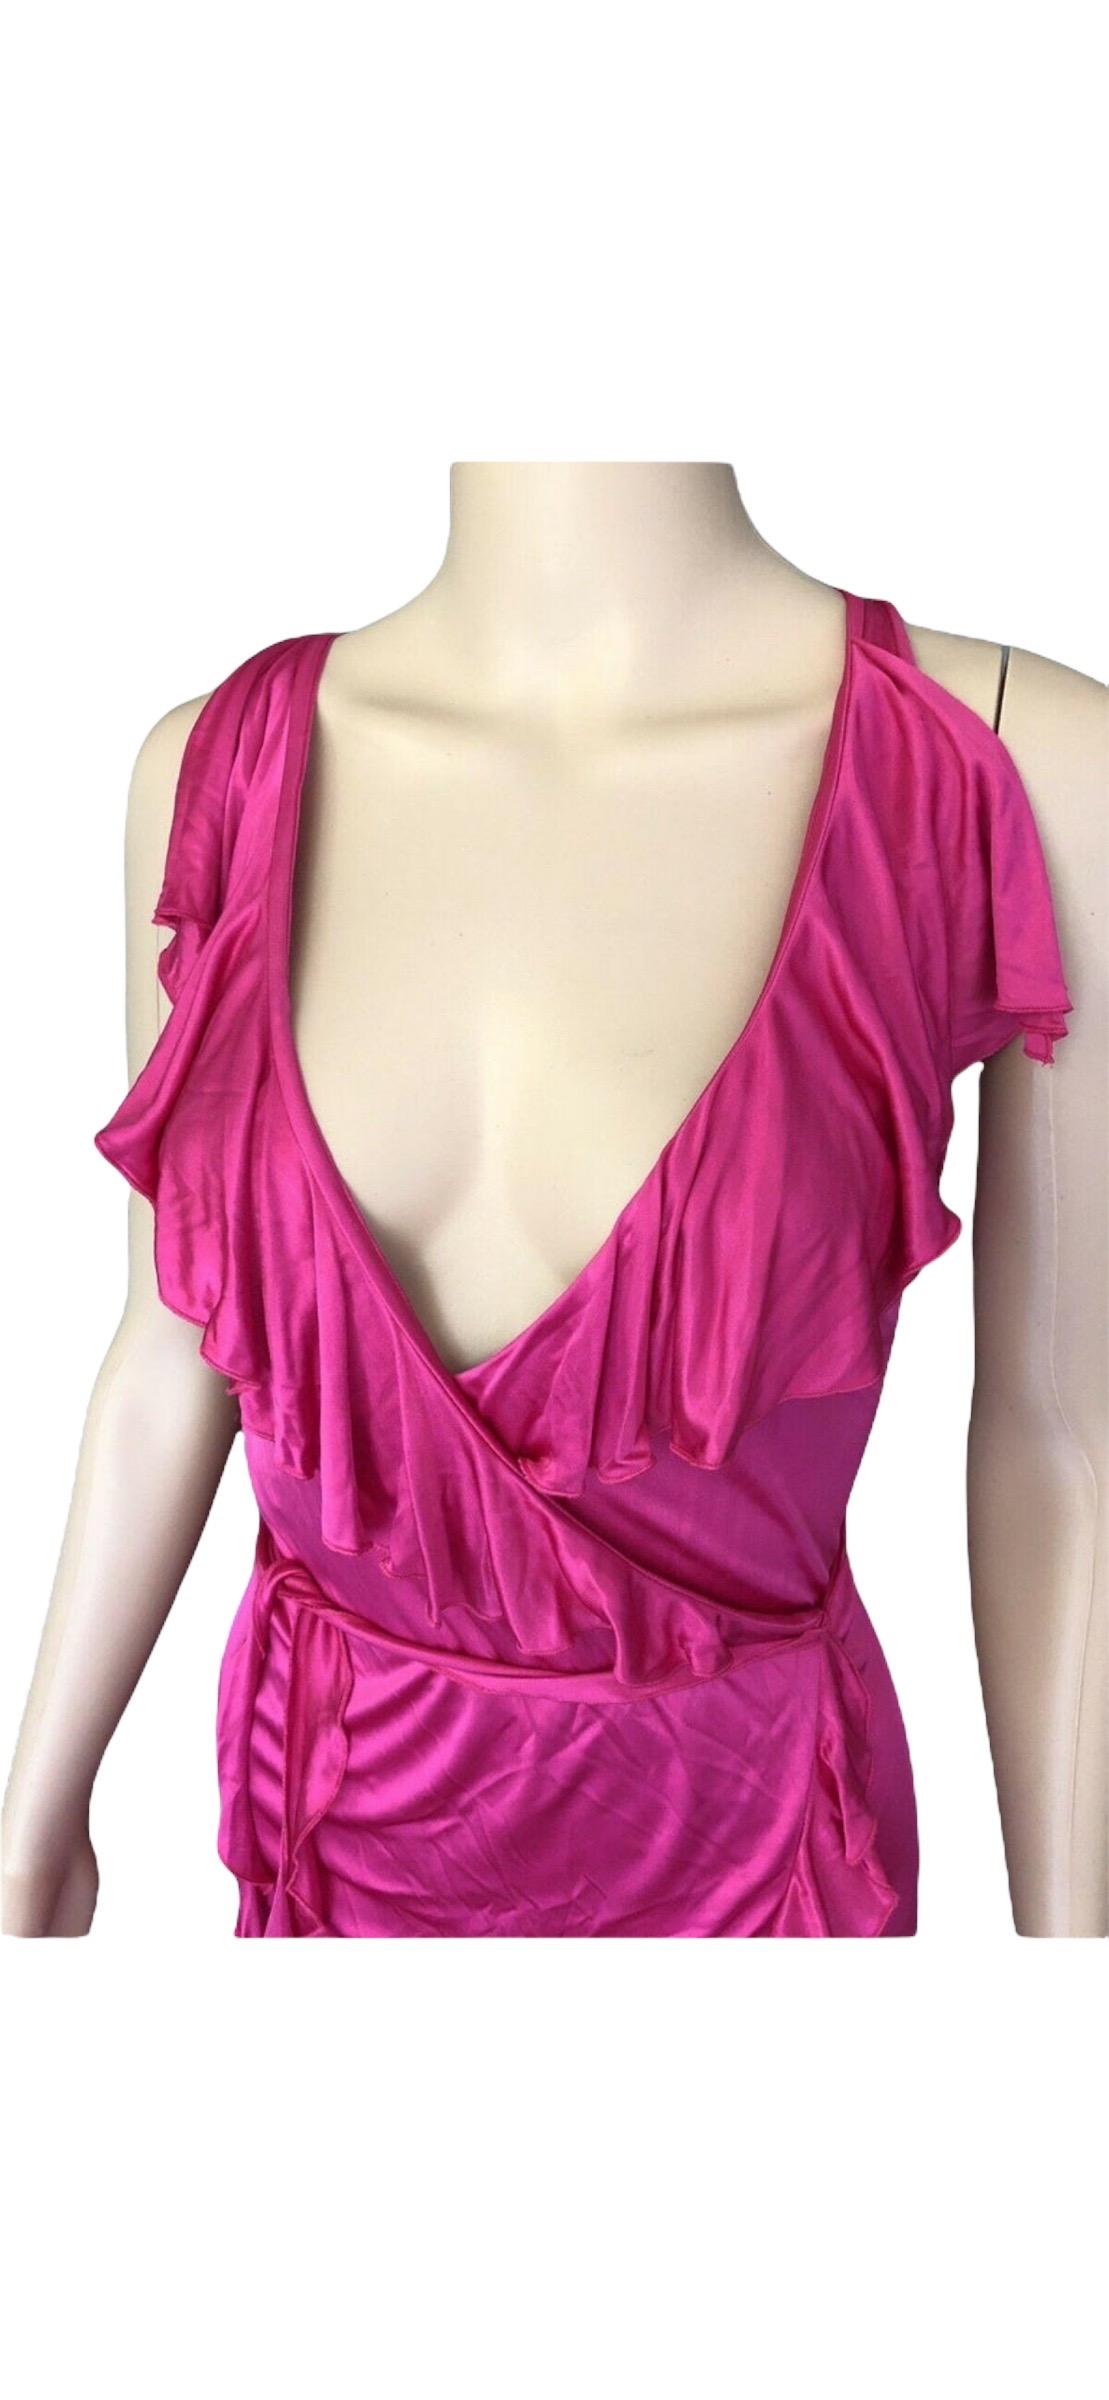 Versace S/S 2004 Runway Plunging Neckline Wrap Ruffles Dress In Good Condition For Sale In Naples, FL